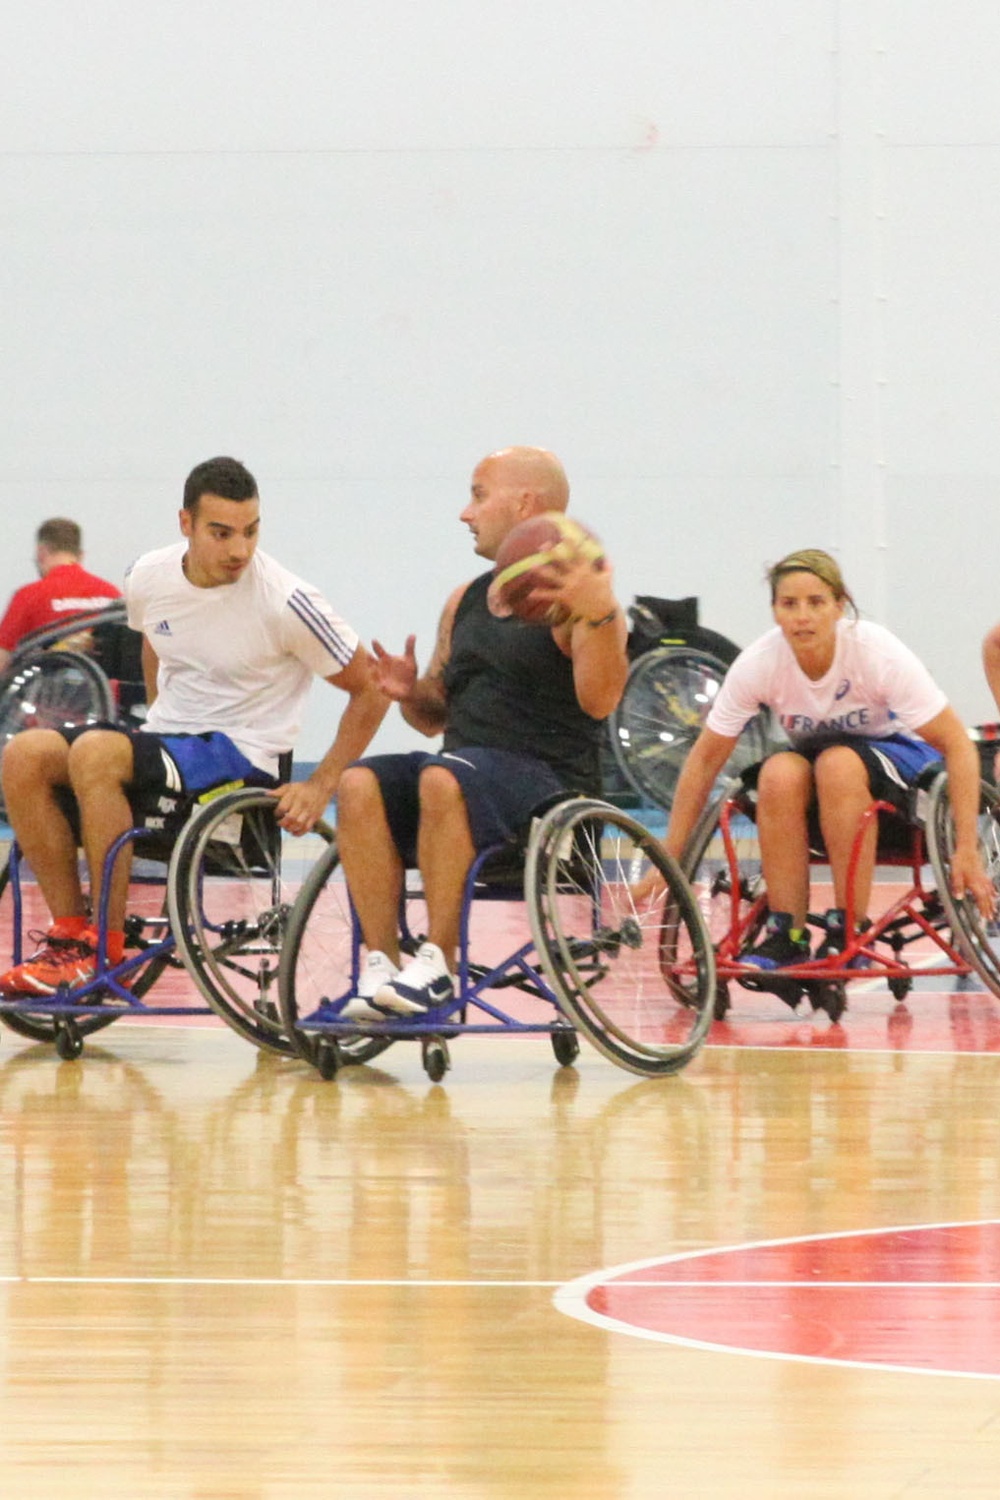 Marines from the US Team begin practice for the Invictus Games